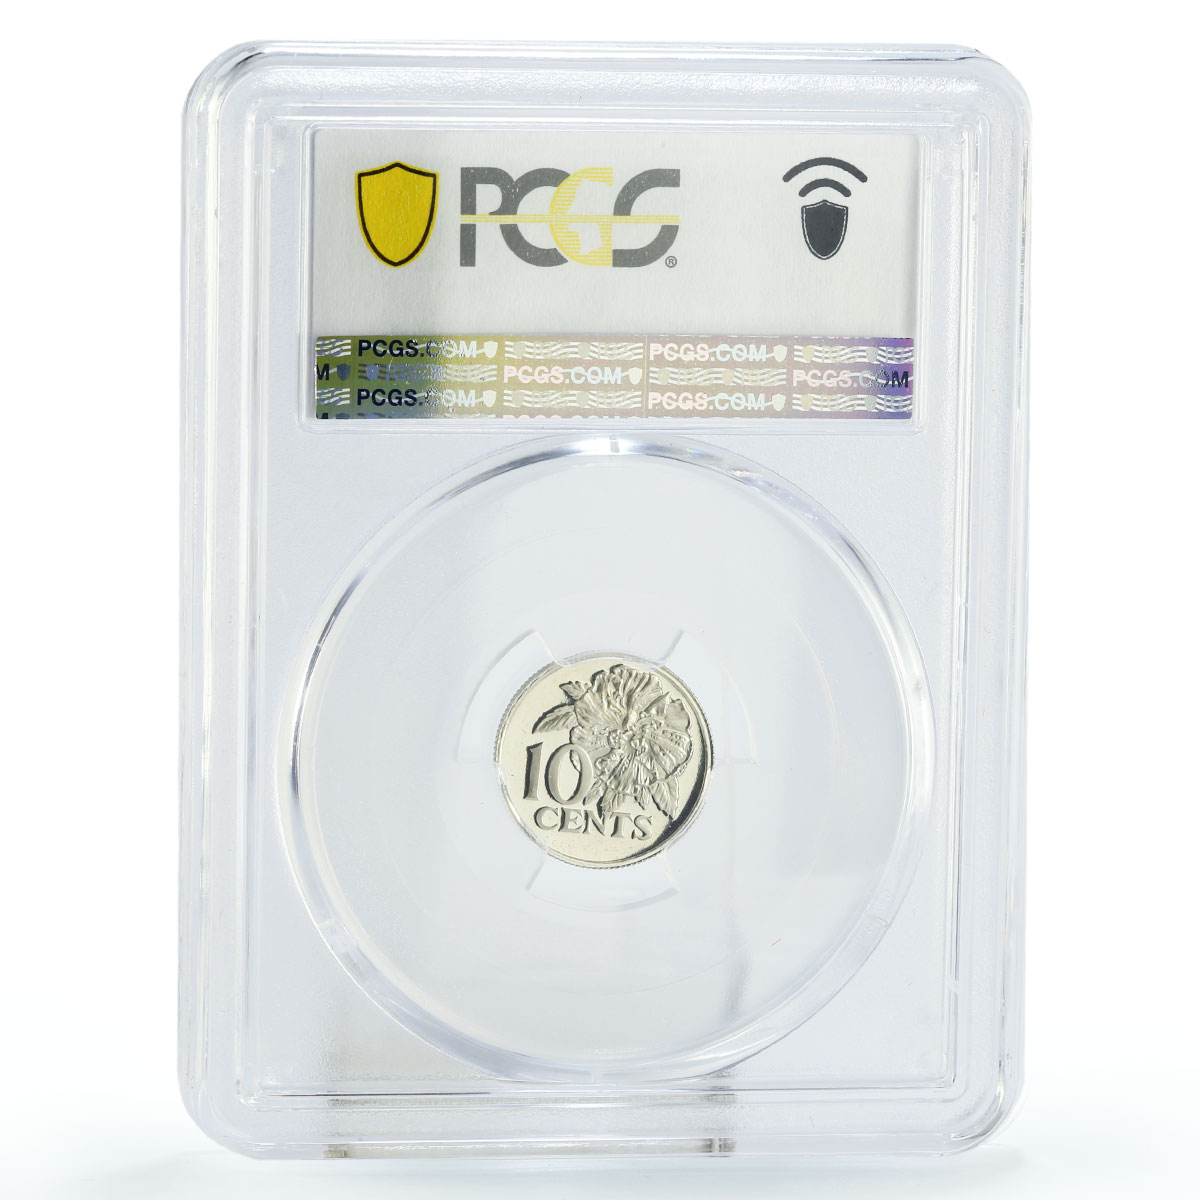 Trinidad and Tobago 10 cents 10th Independence KM-27 PR69 PCGS CuNi coin 1975